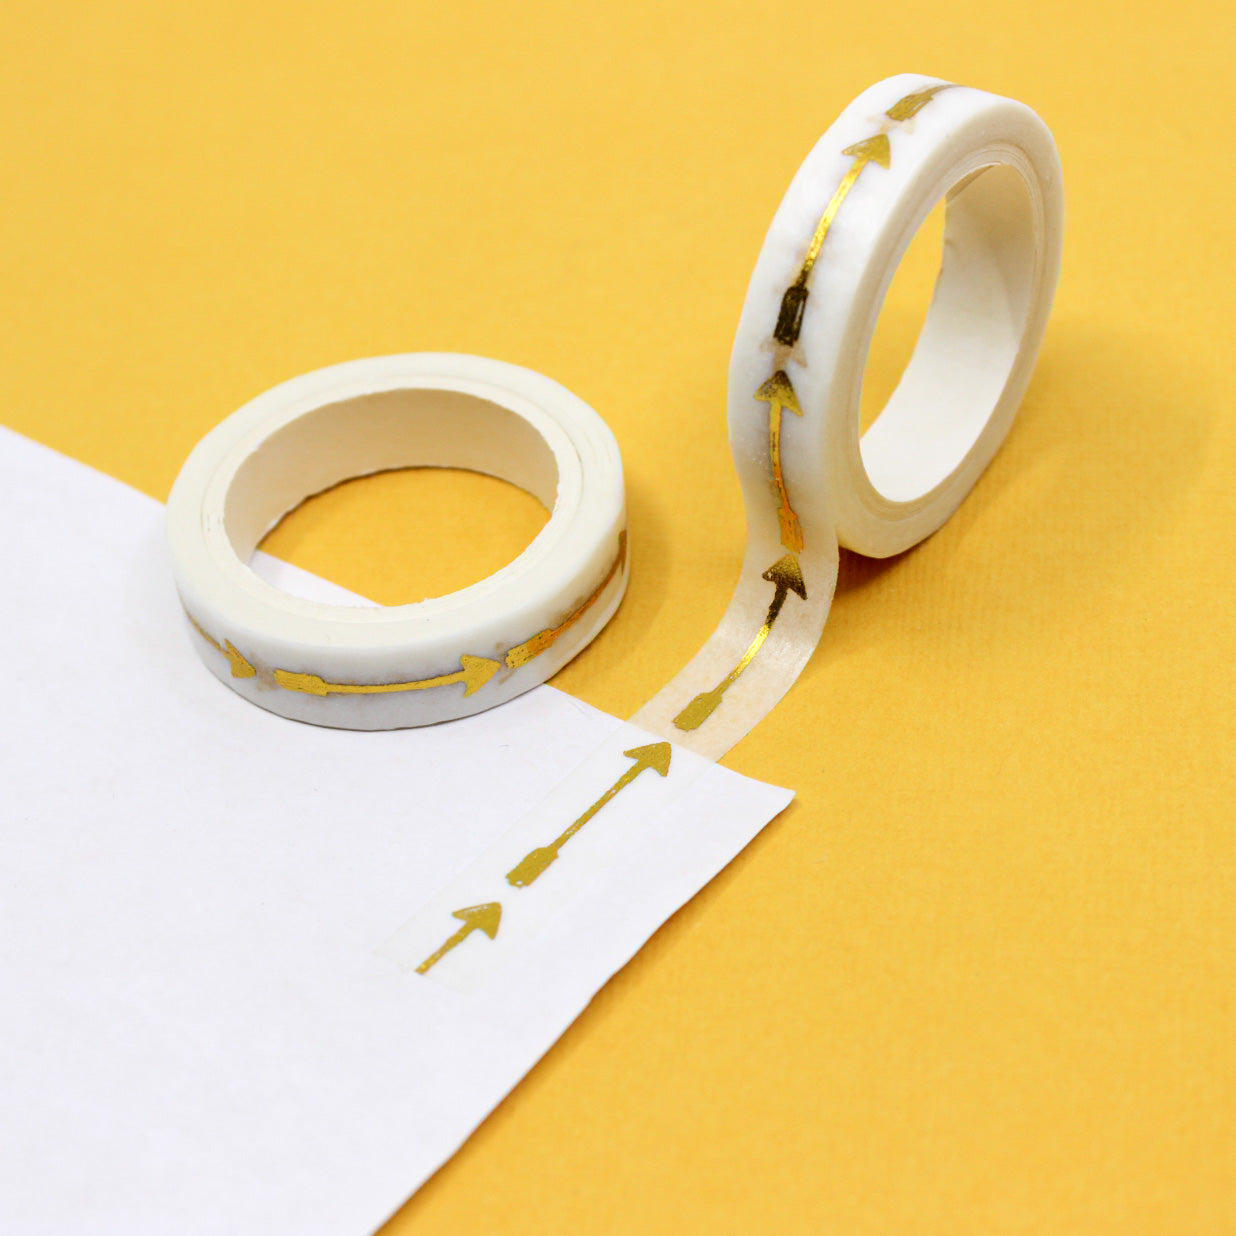 Accentuate your projects with our Gold Foil Arrow Washi Tape, featuring sleek and shimmering gold arrows. Ideal for adding a touch of elegance and direction to your crafts. This tape is sold at BBB Supplies Craft Shop.